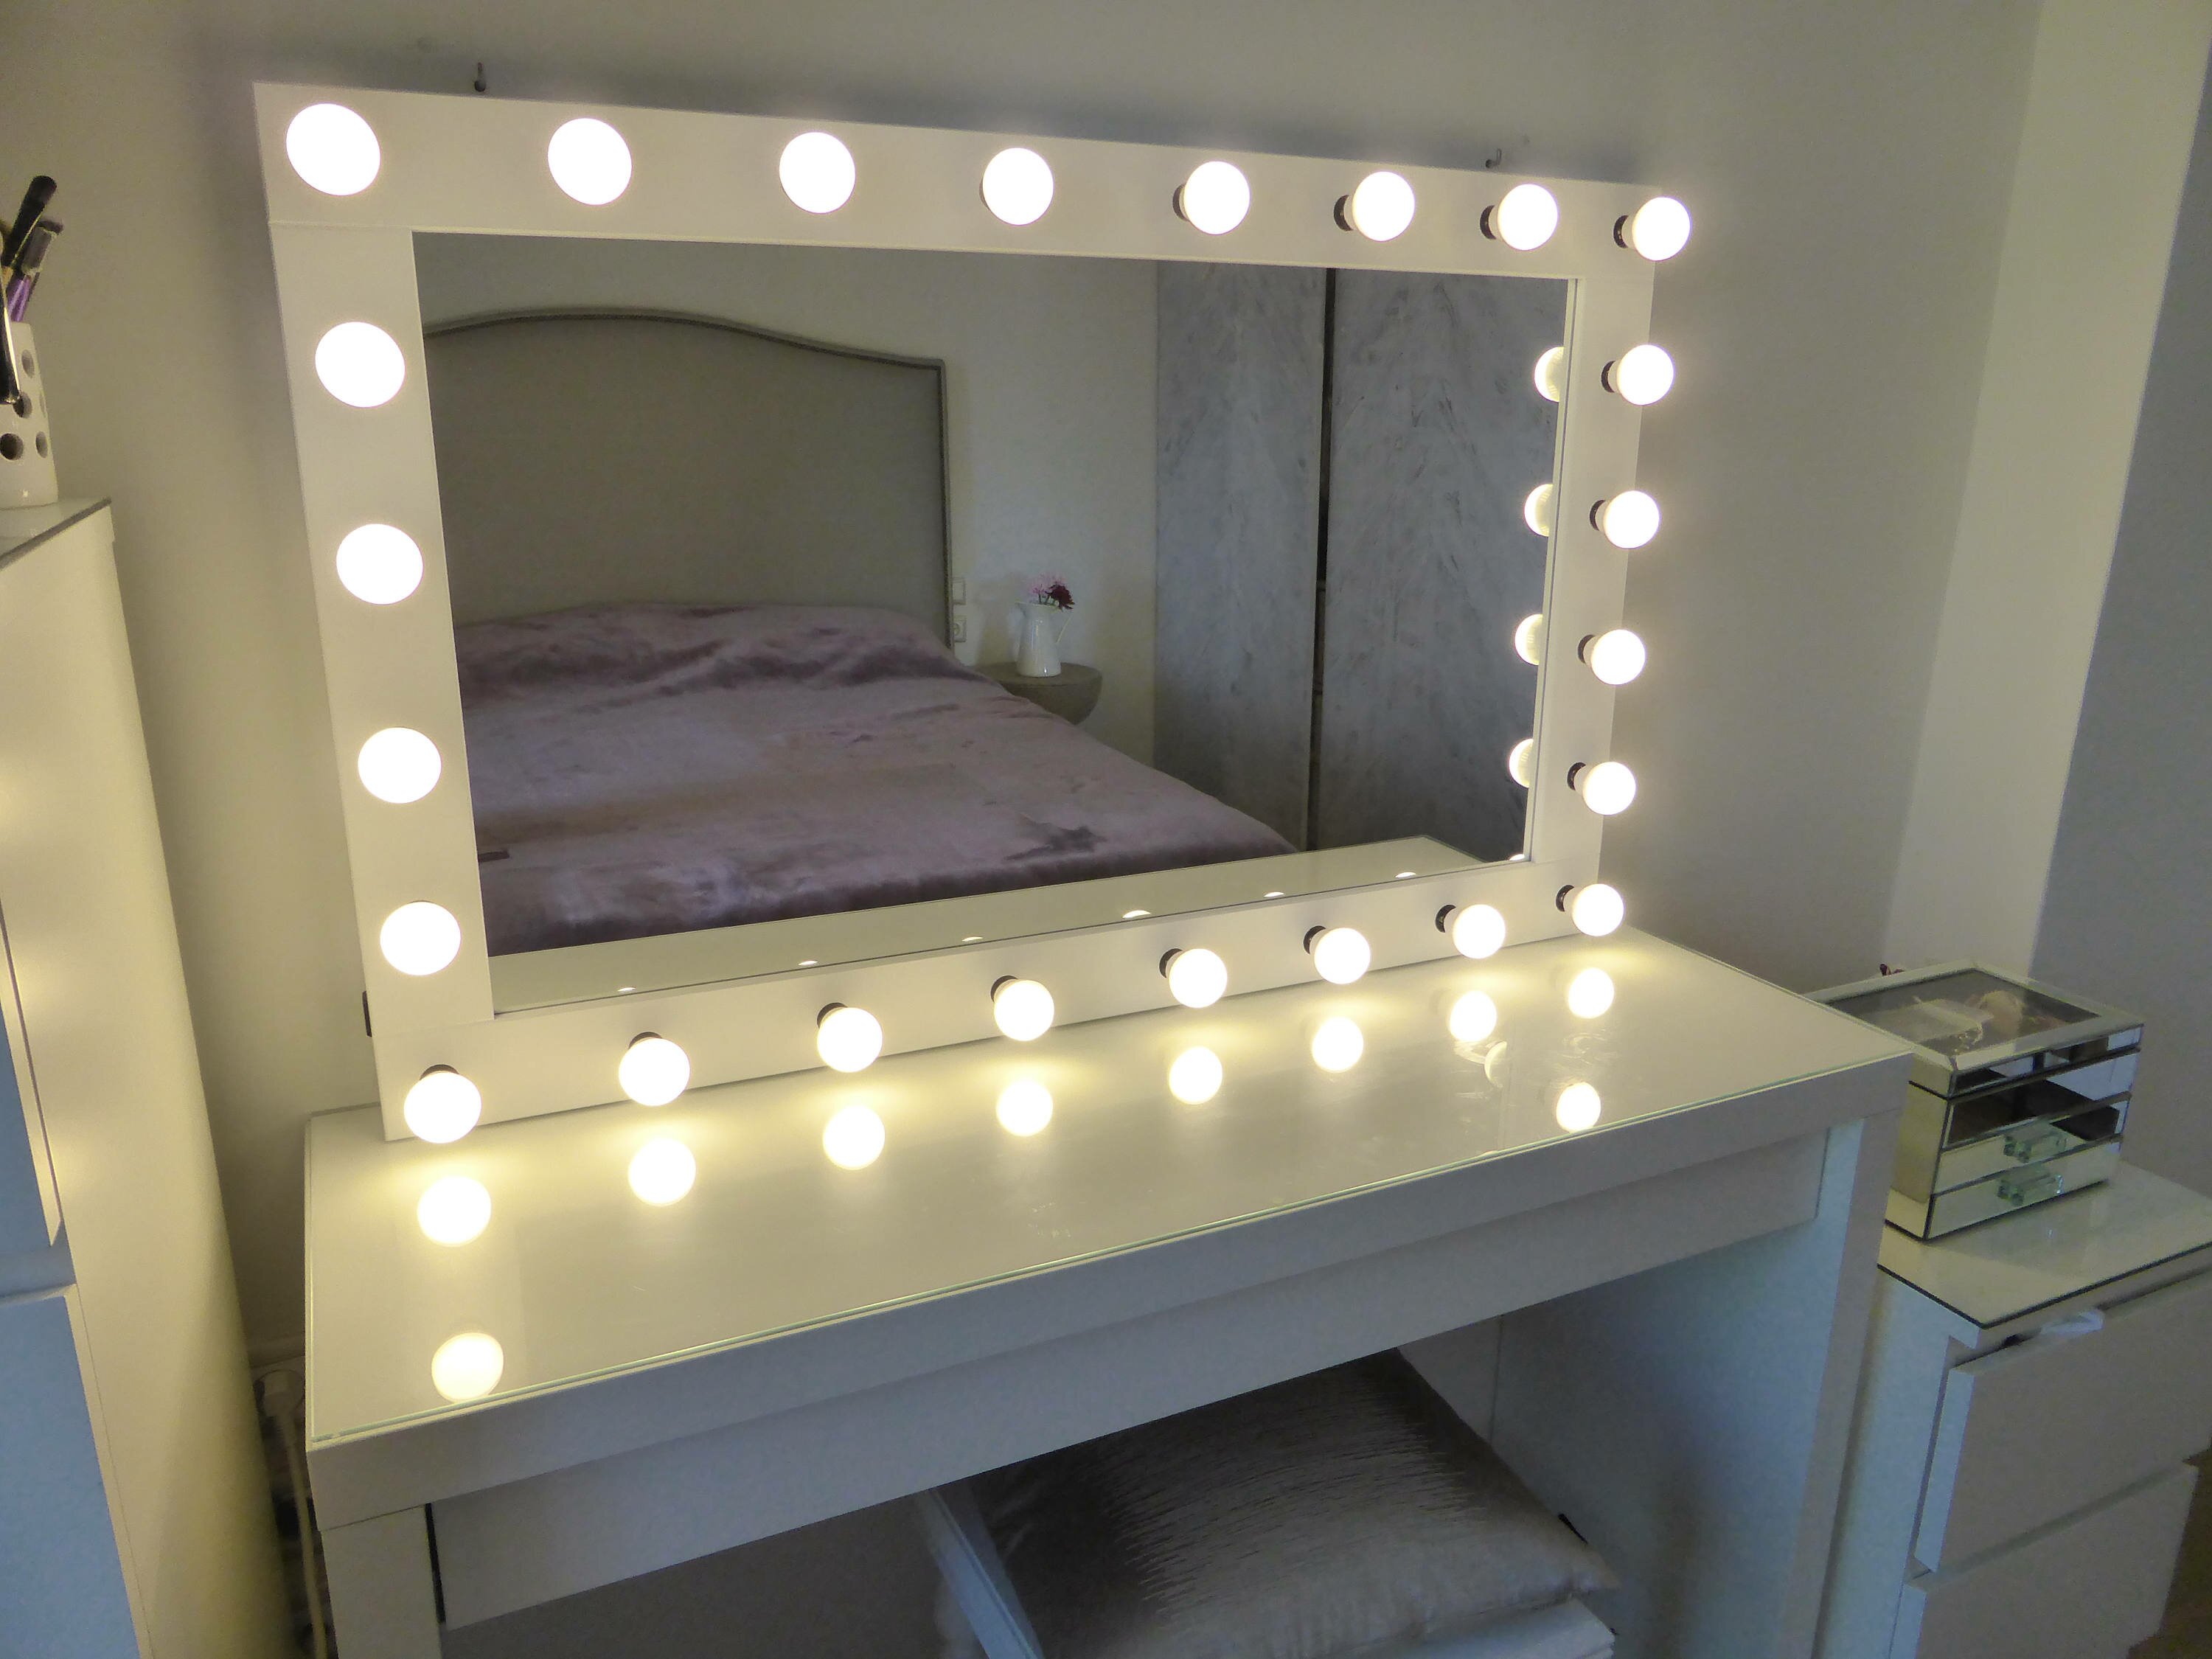 Hollywood Vanity Mirror with Lights for Best Vanity Room Ideas: Hollywood Vanity Mirror With Lights | Vanity Makeup Mirrors With Lights | Hollywood Style Makeup Vanity